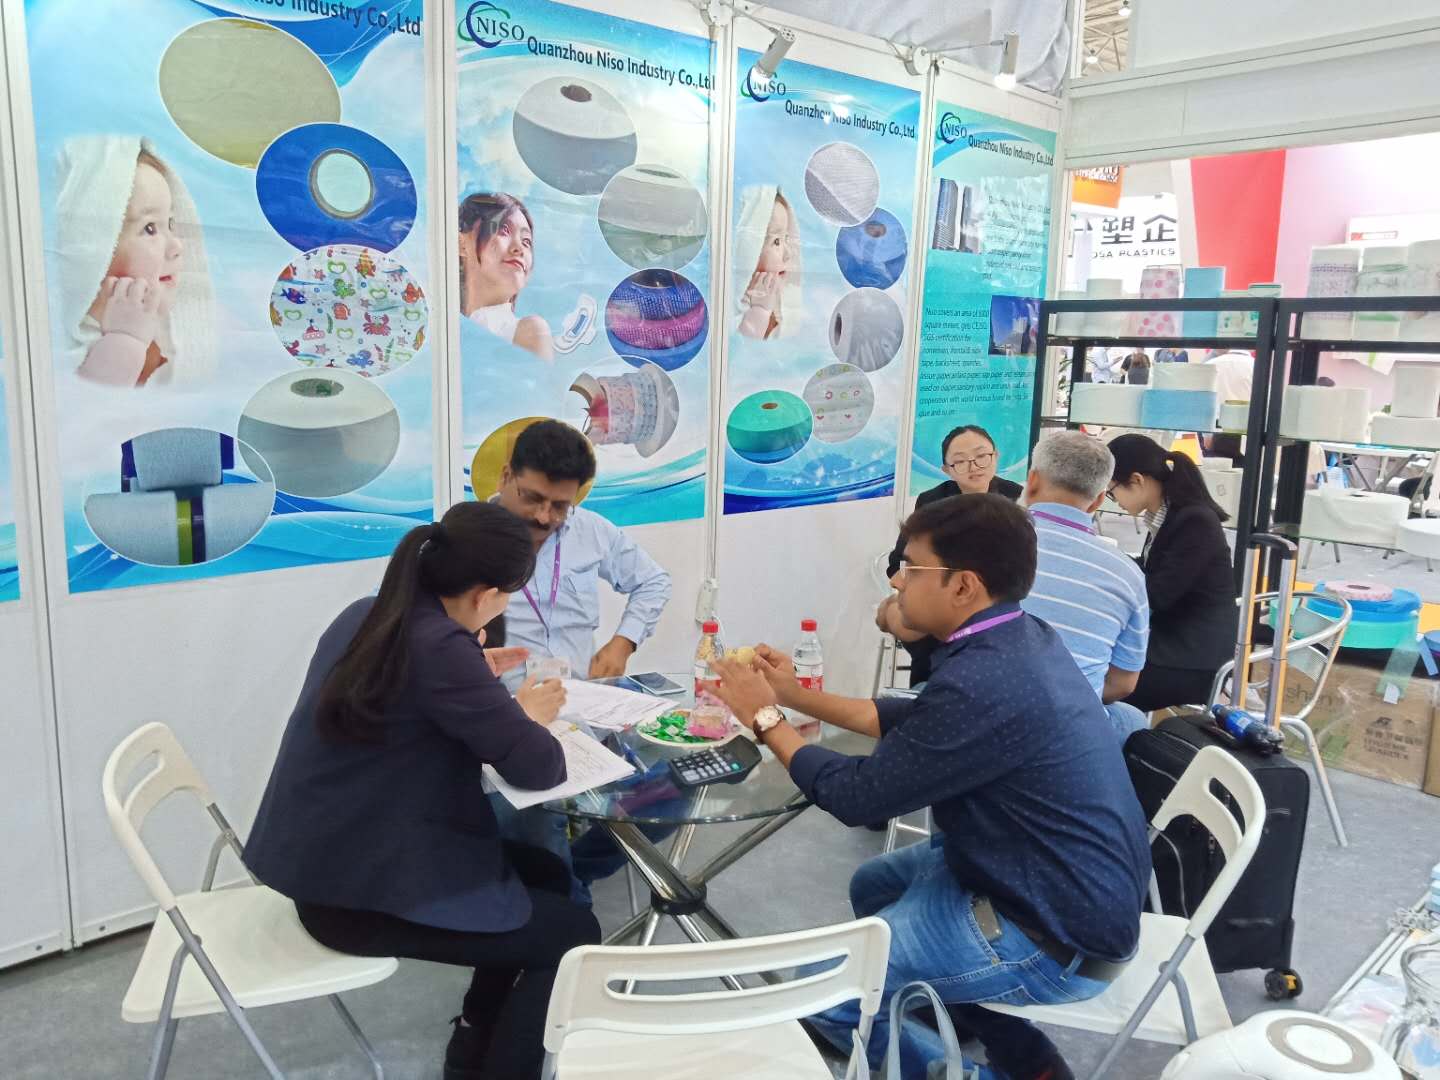 About Quanzhou Niso Industry Co.,Ltd’s Wuhan this exhibition